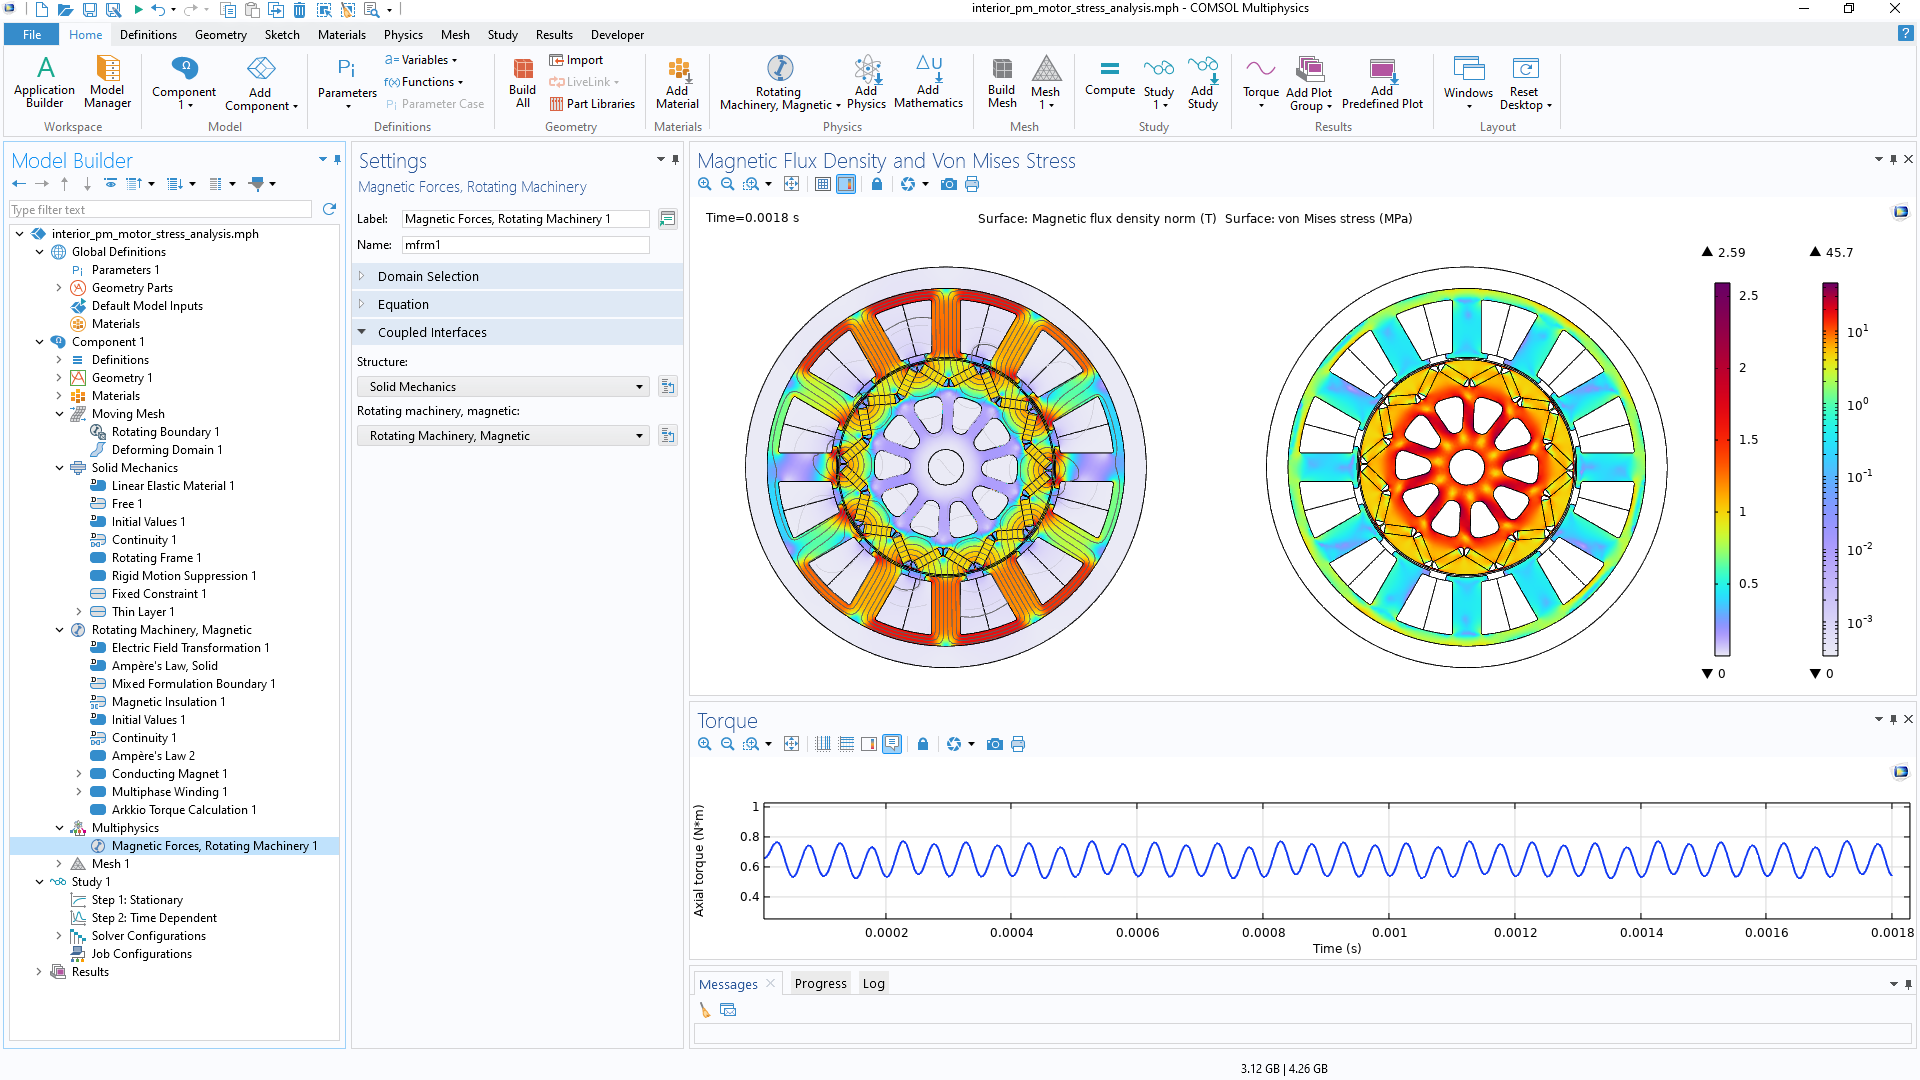 title="" alt="The COMSOL Multiphysics UI showing the Model Builder with the Magnetic Forces, Rotating Machinery node highlighted; the corresponding Settings window; and two Graphics windows showing two motors and a 1D plot, respectively."